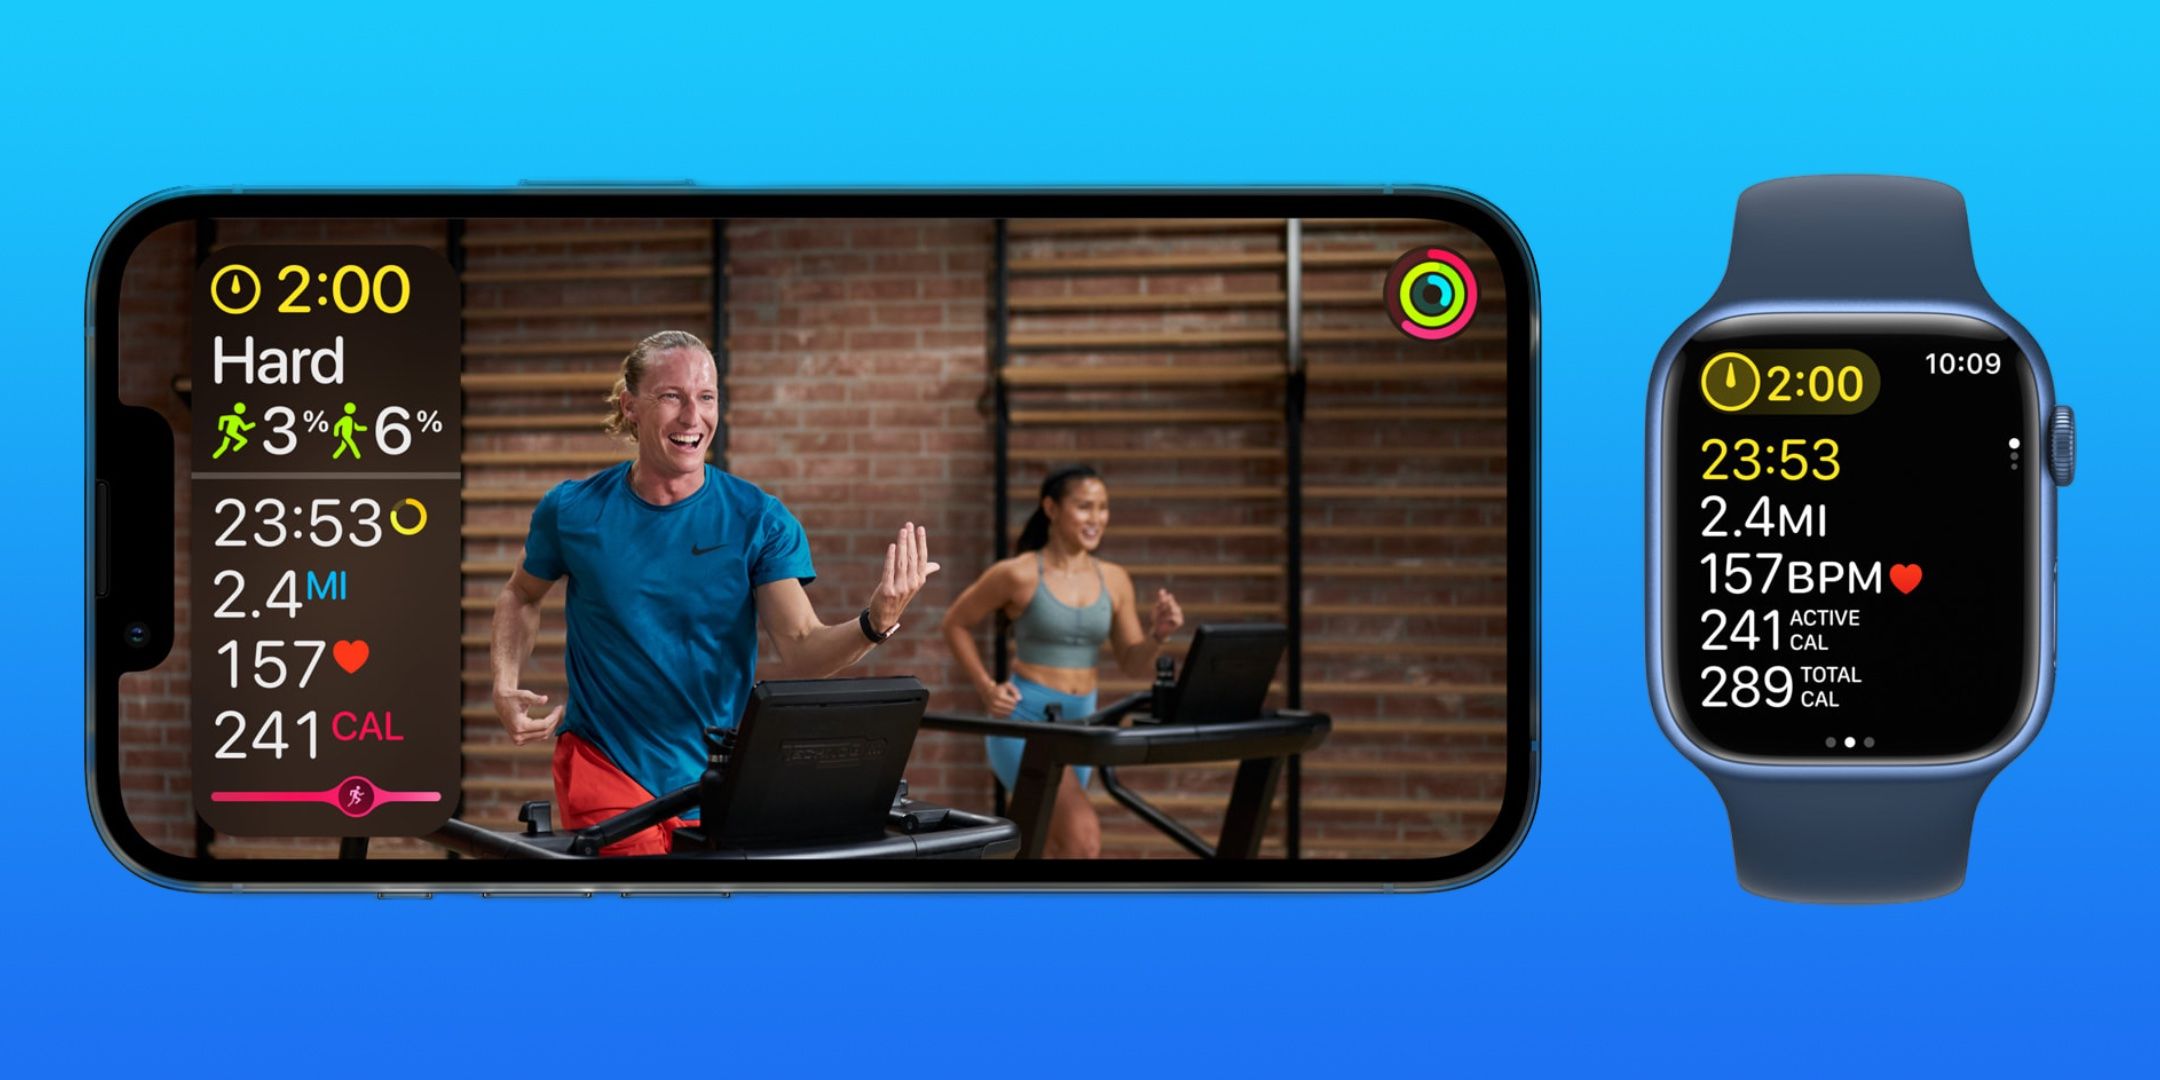 The Fitness+ App with iOS 16 and WatchOS 9.